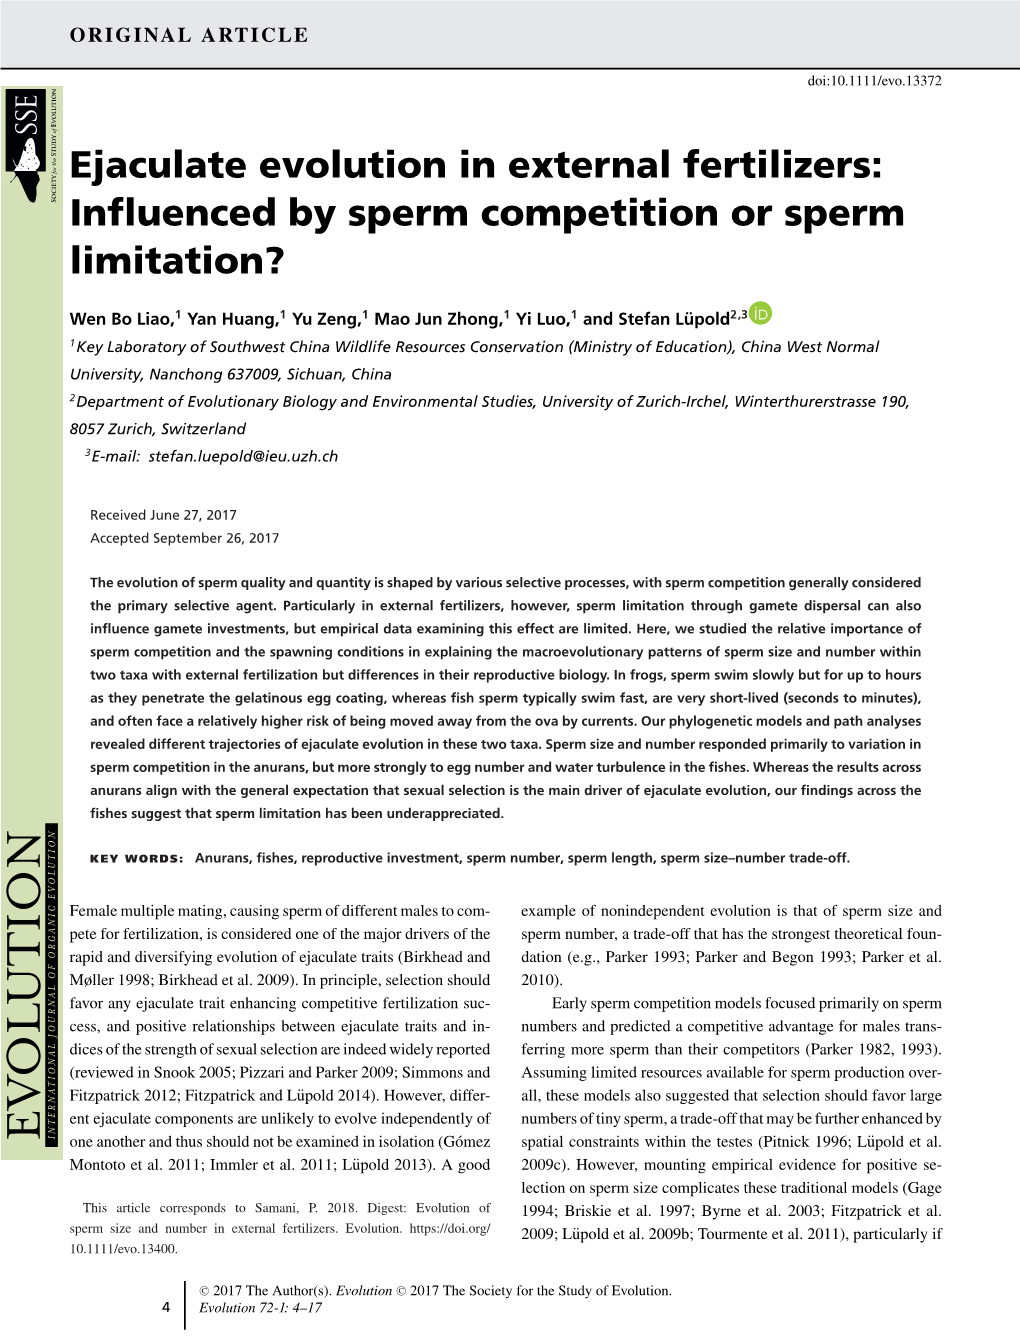 Ejaculate Evolution in External Fertilizers: Influenced by Sperm Competition Or Sperm Limitation&#X0003f